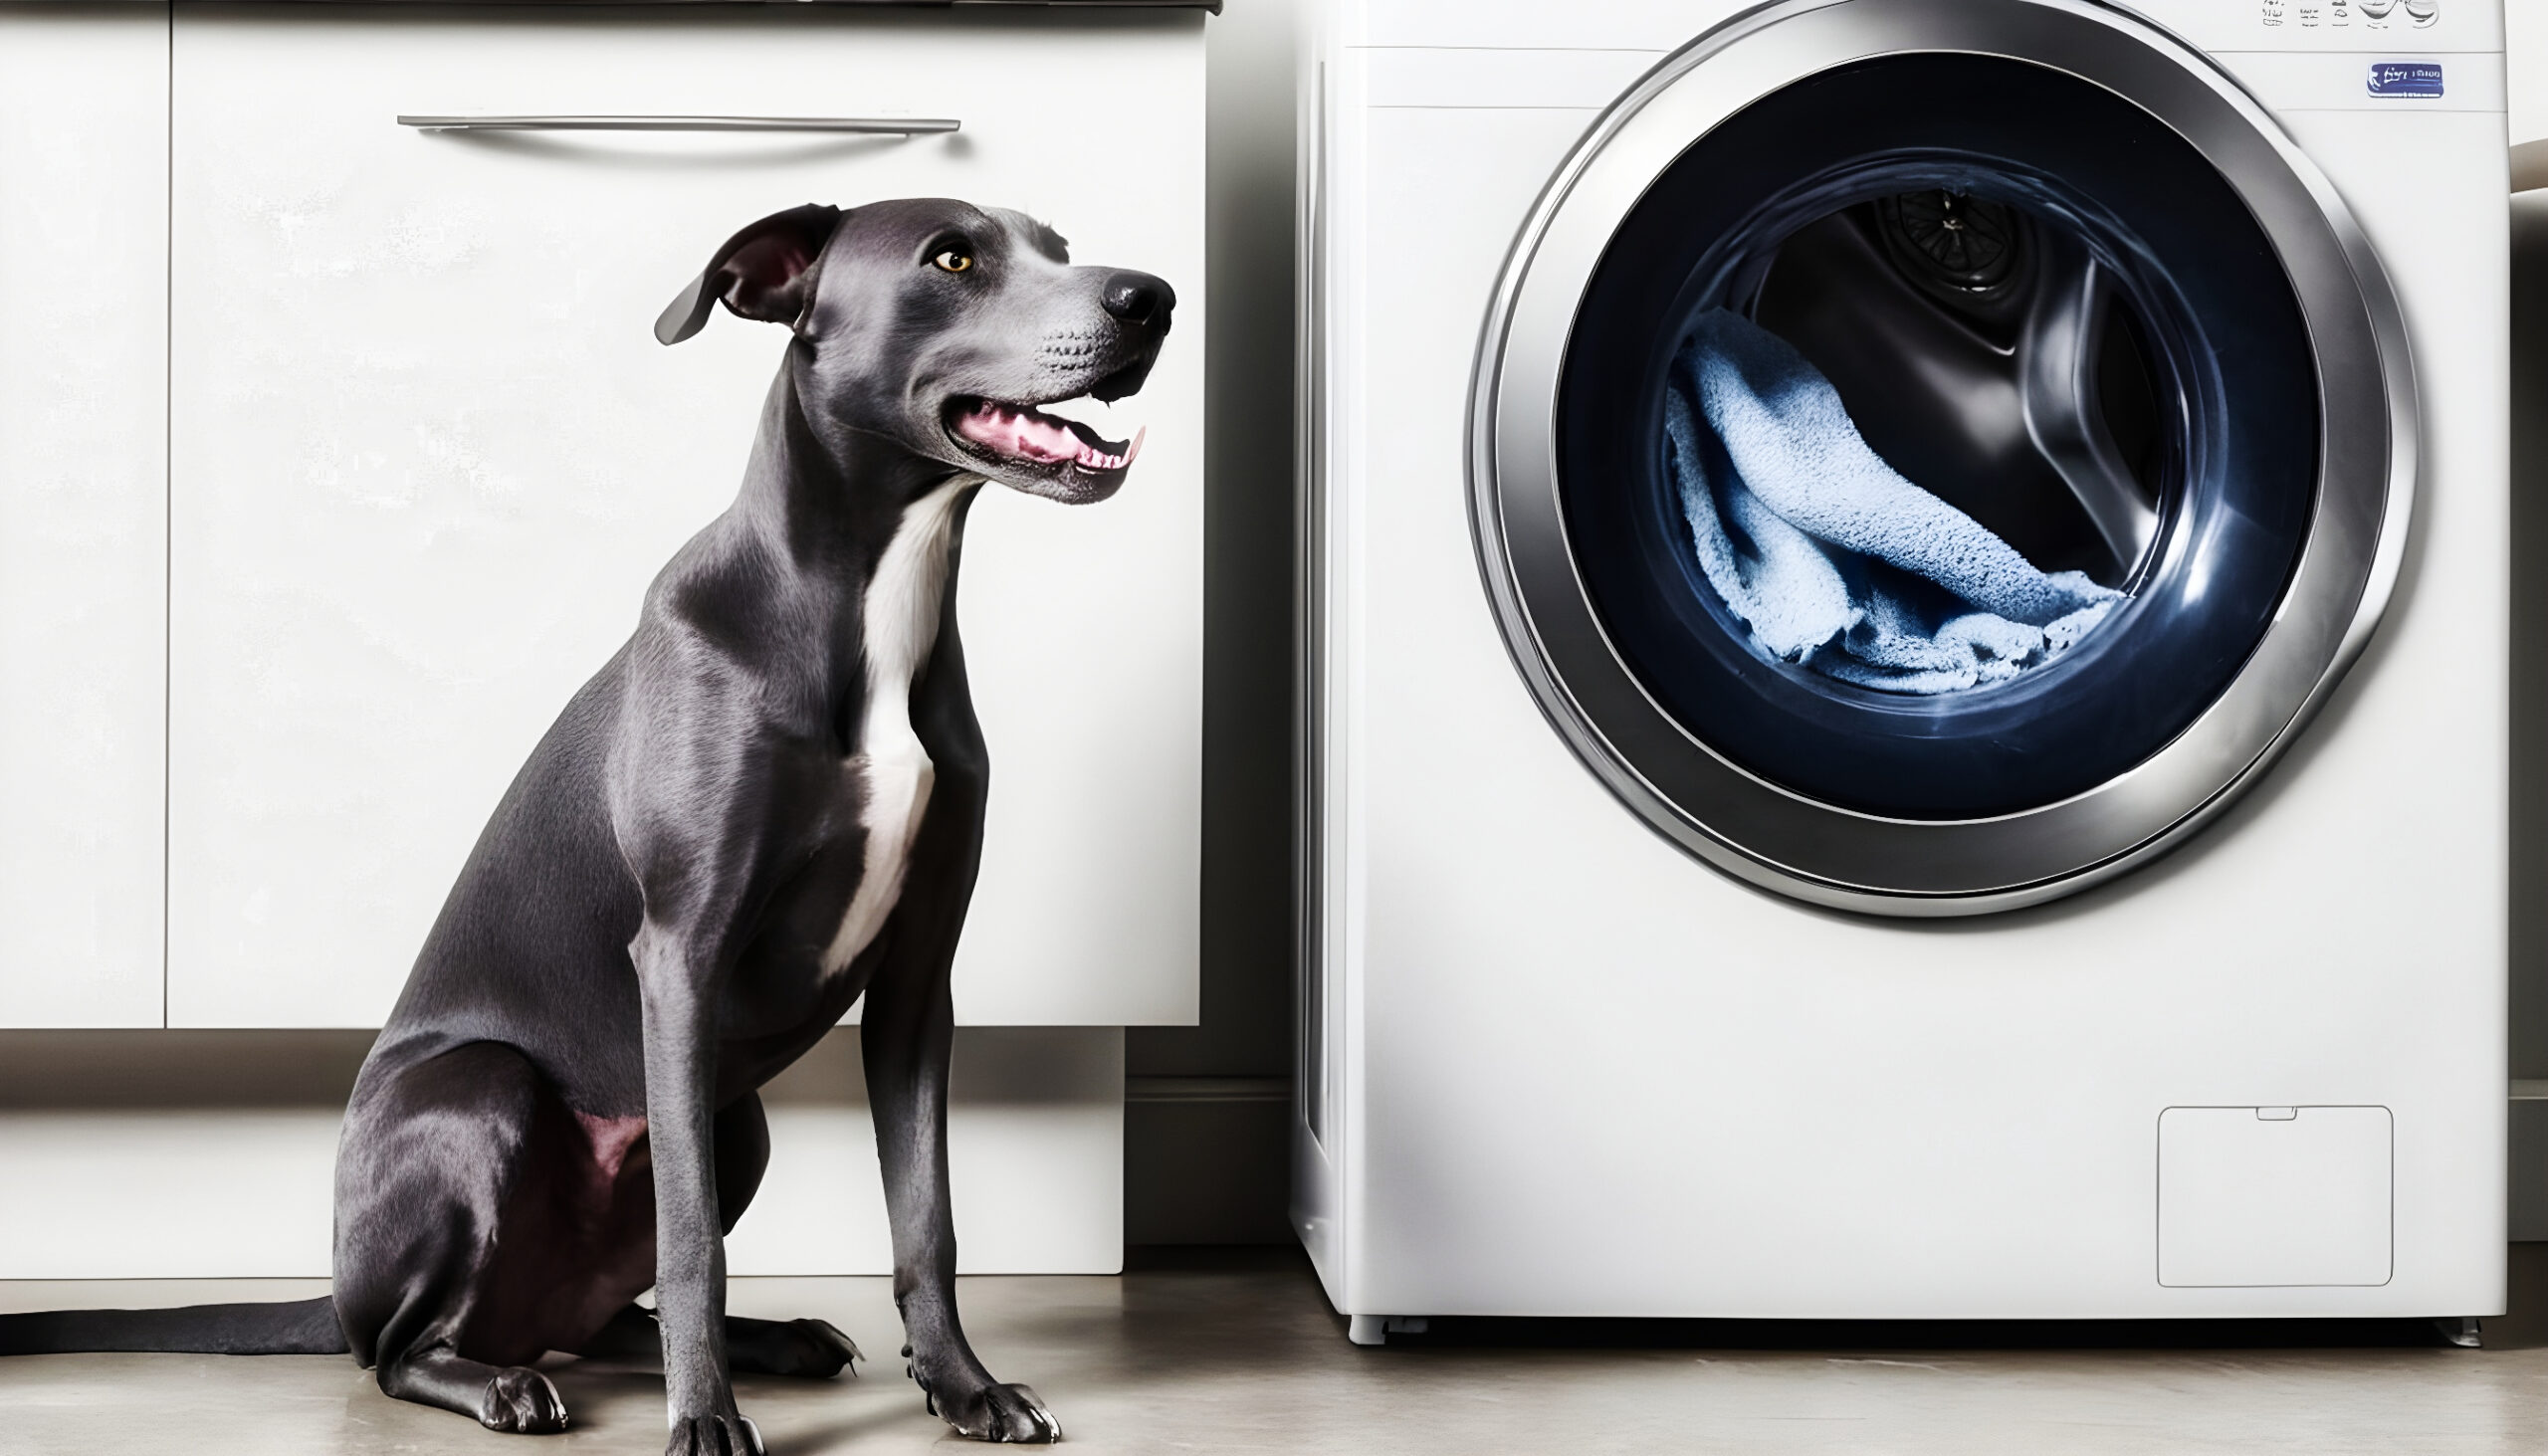 Professional Samsung washer repair services in Lakeway, TX